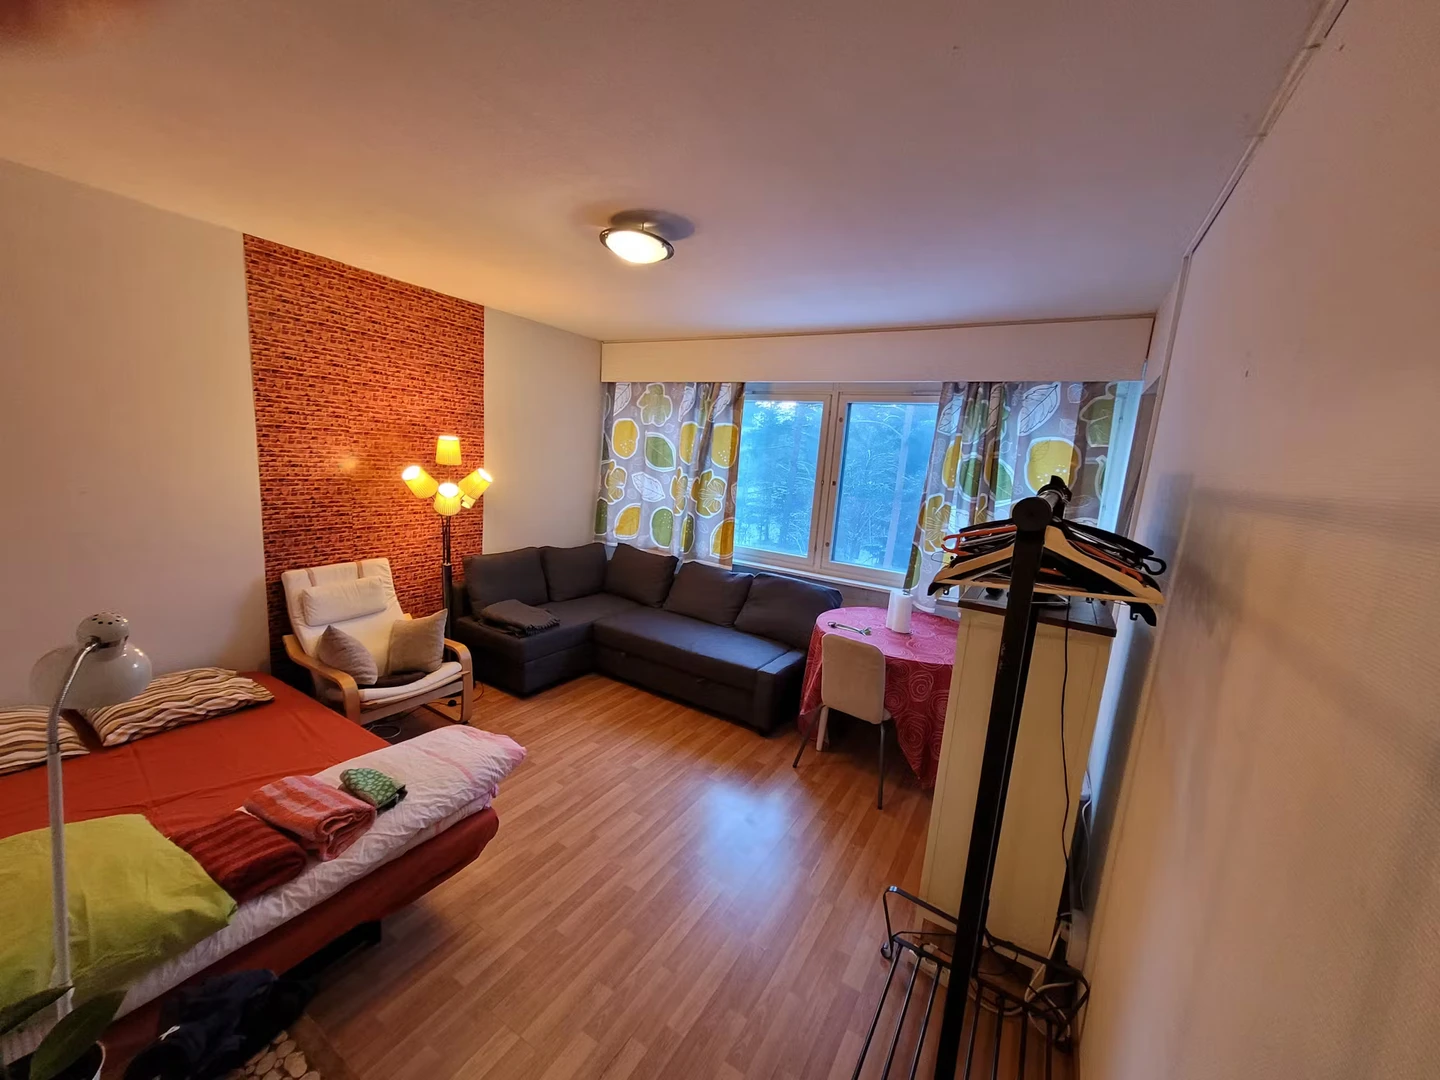 Accommodation in the centre of Espoo